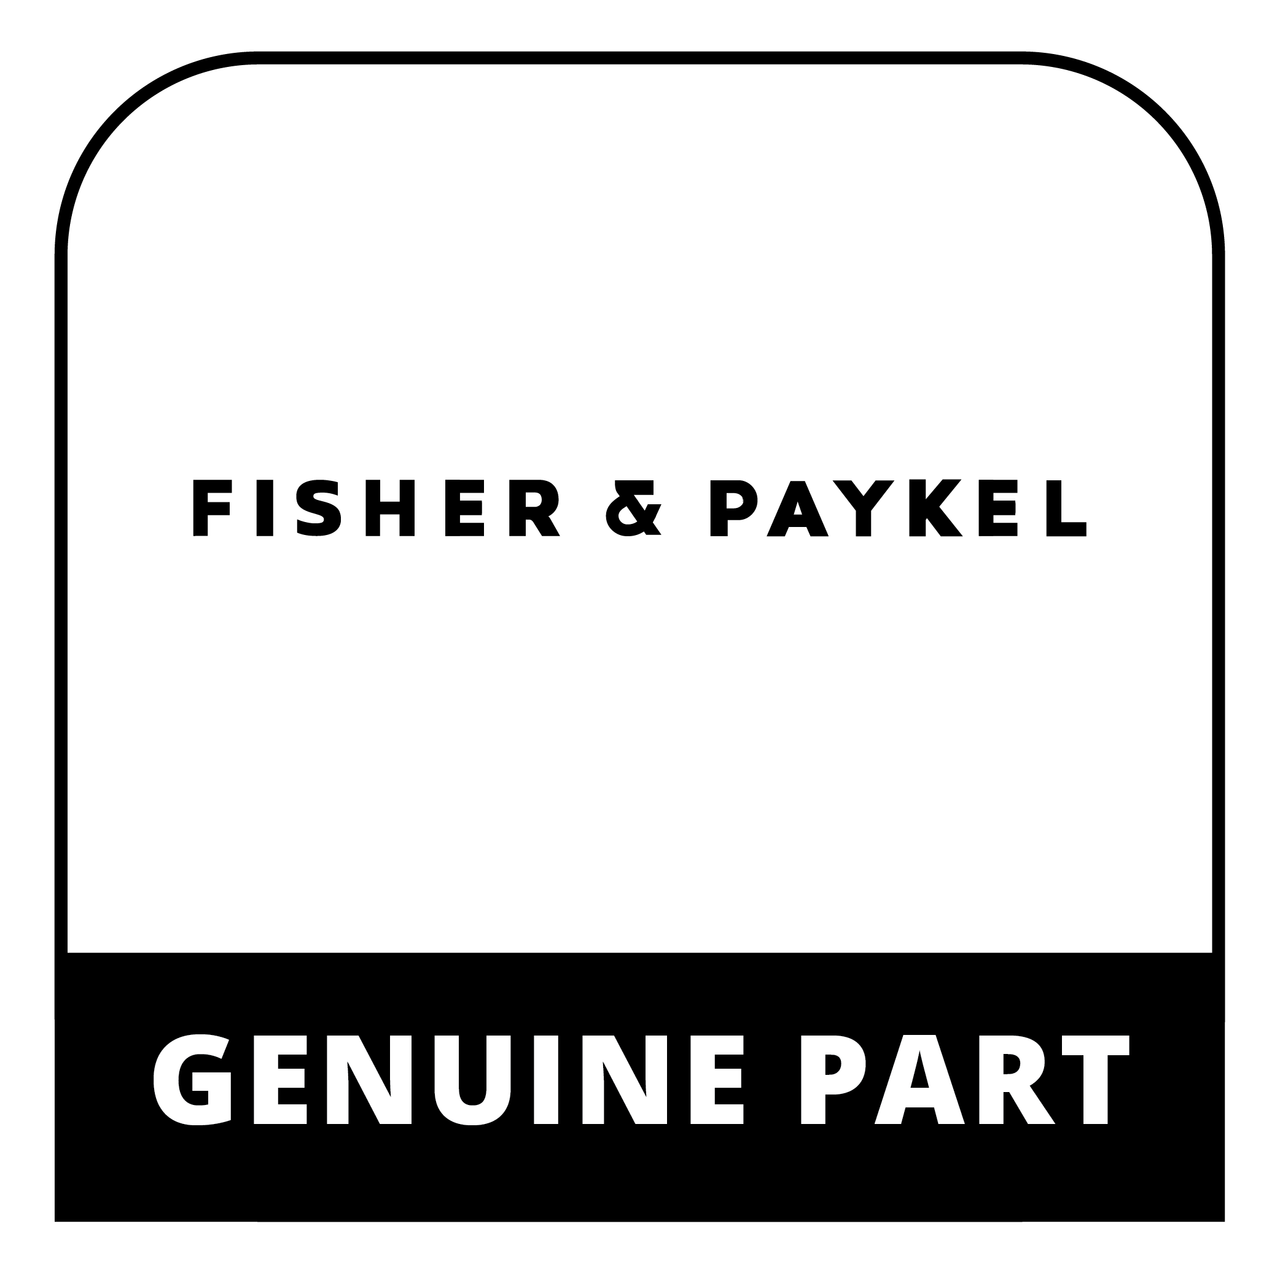 Fisher & Paykel DCS 212343 - Left Hand Lid Handle End Cap - Bright Chrome Plated - Genuine Fisher & Paykel (DCS) Part